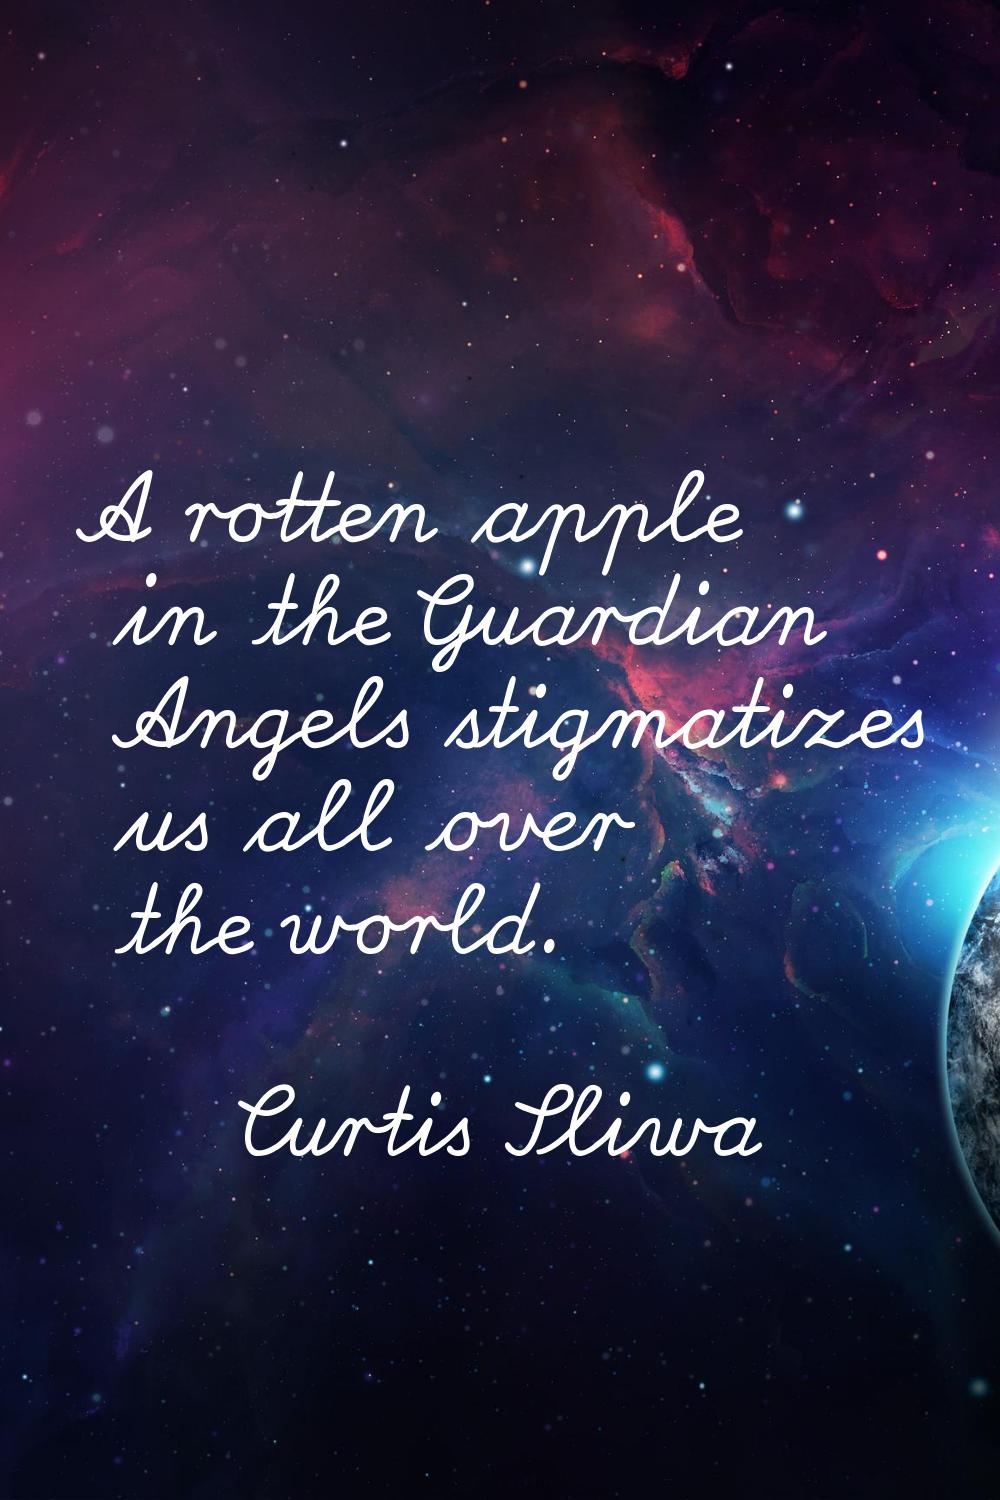 A rotten apple in the Guardian Angels stigmatizes us all over the world.